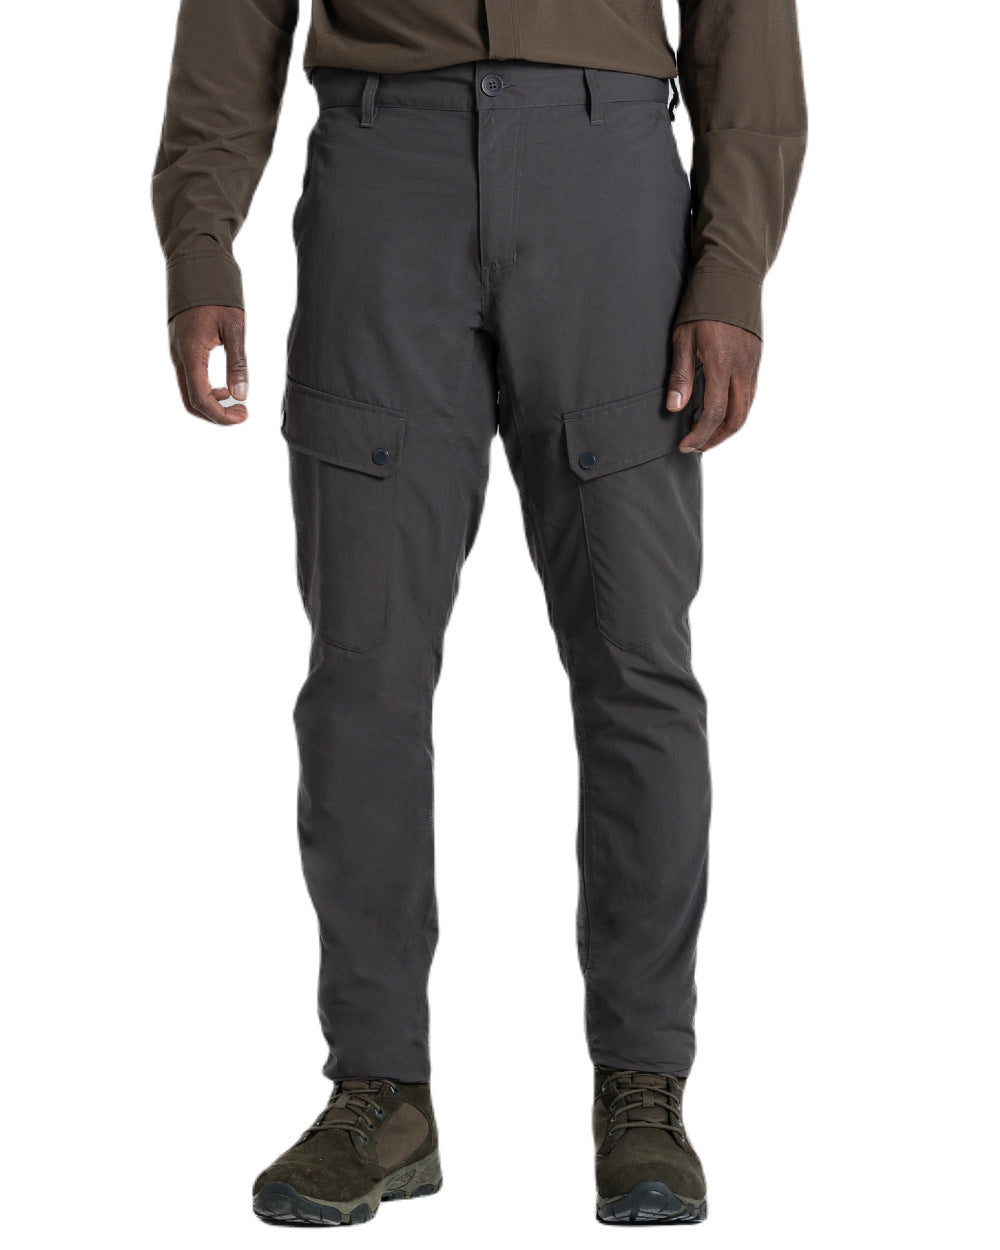 Black Pepper Coloured Craghoppers Mens NosiLife Adventure Trousers On A White Background 